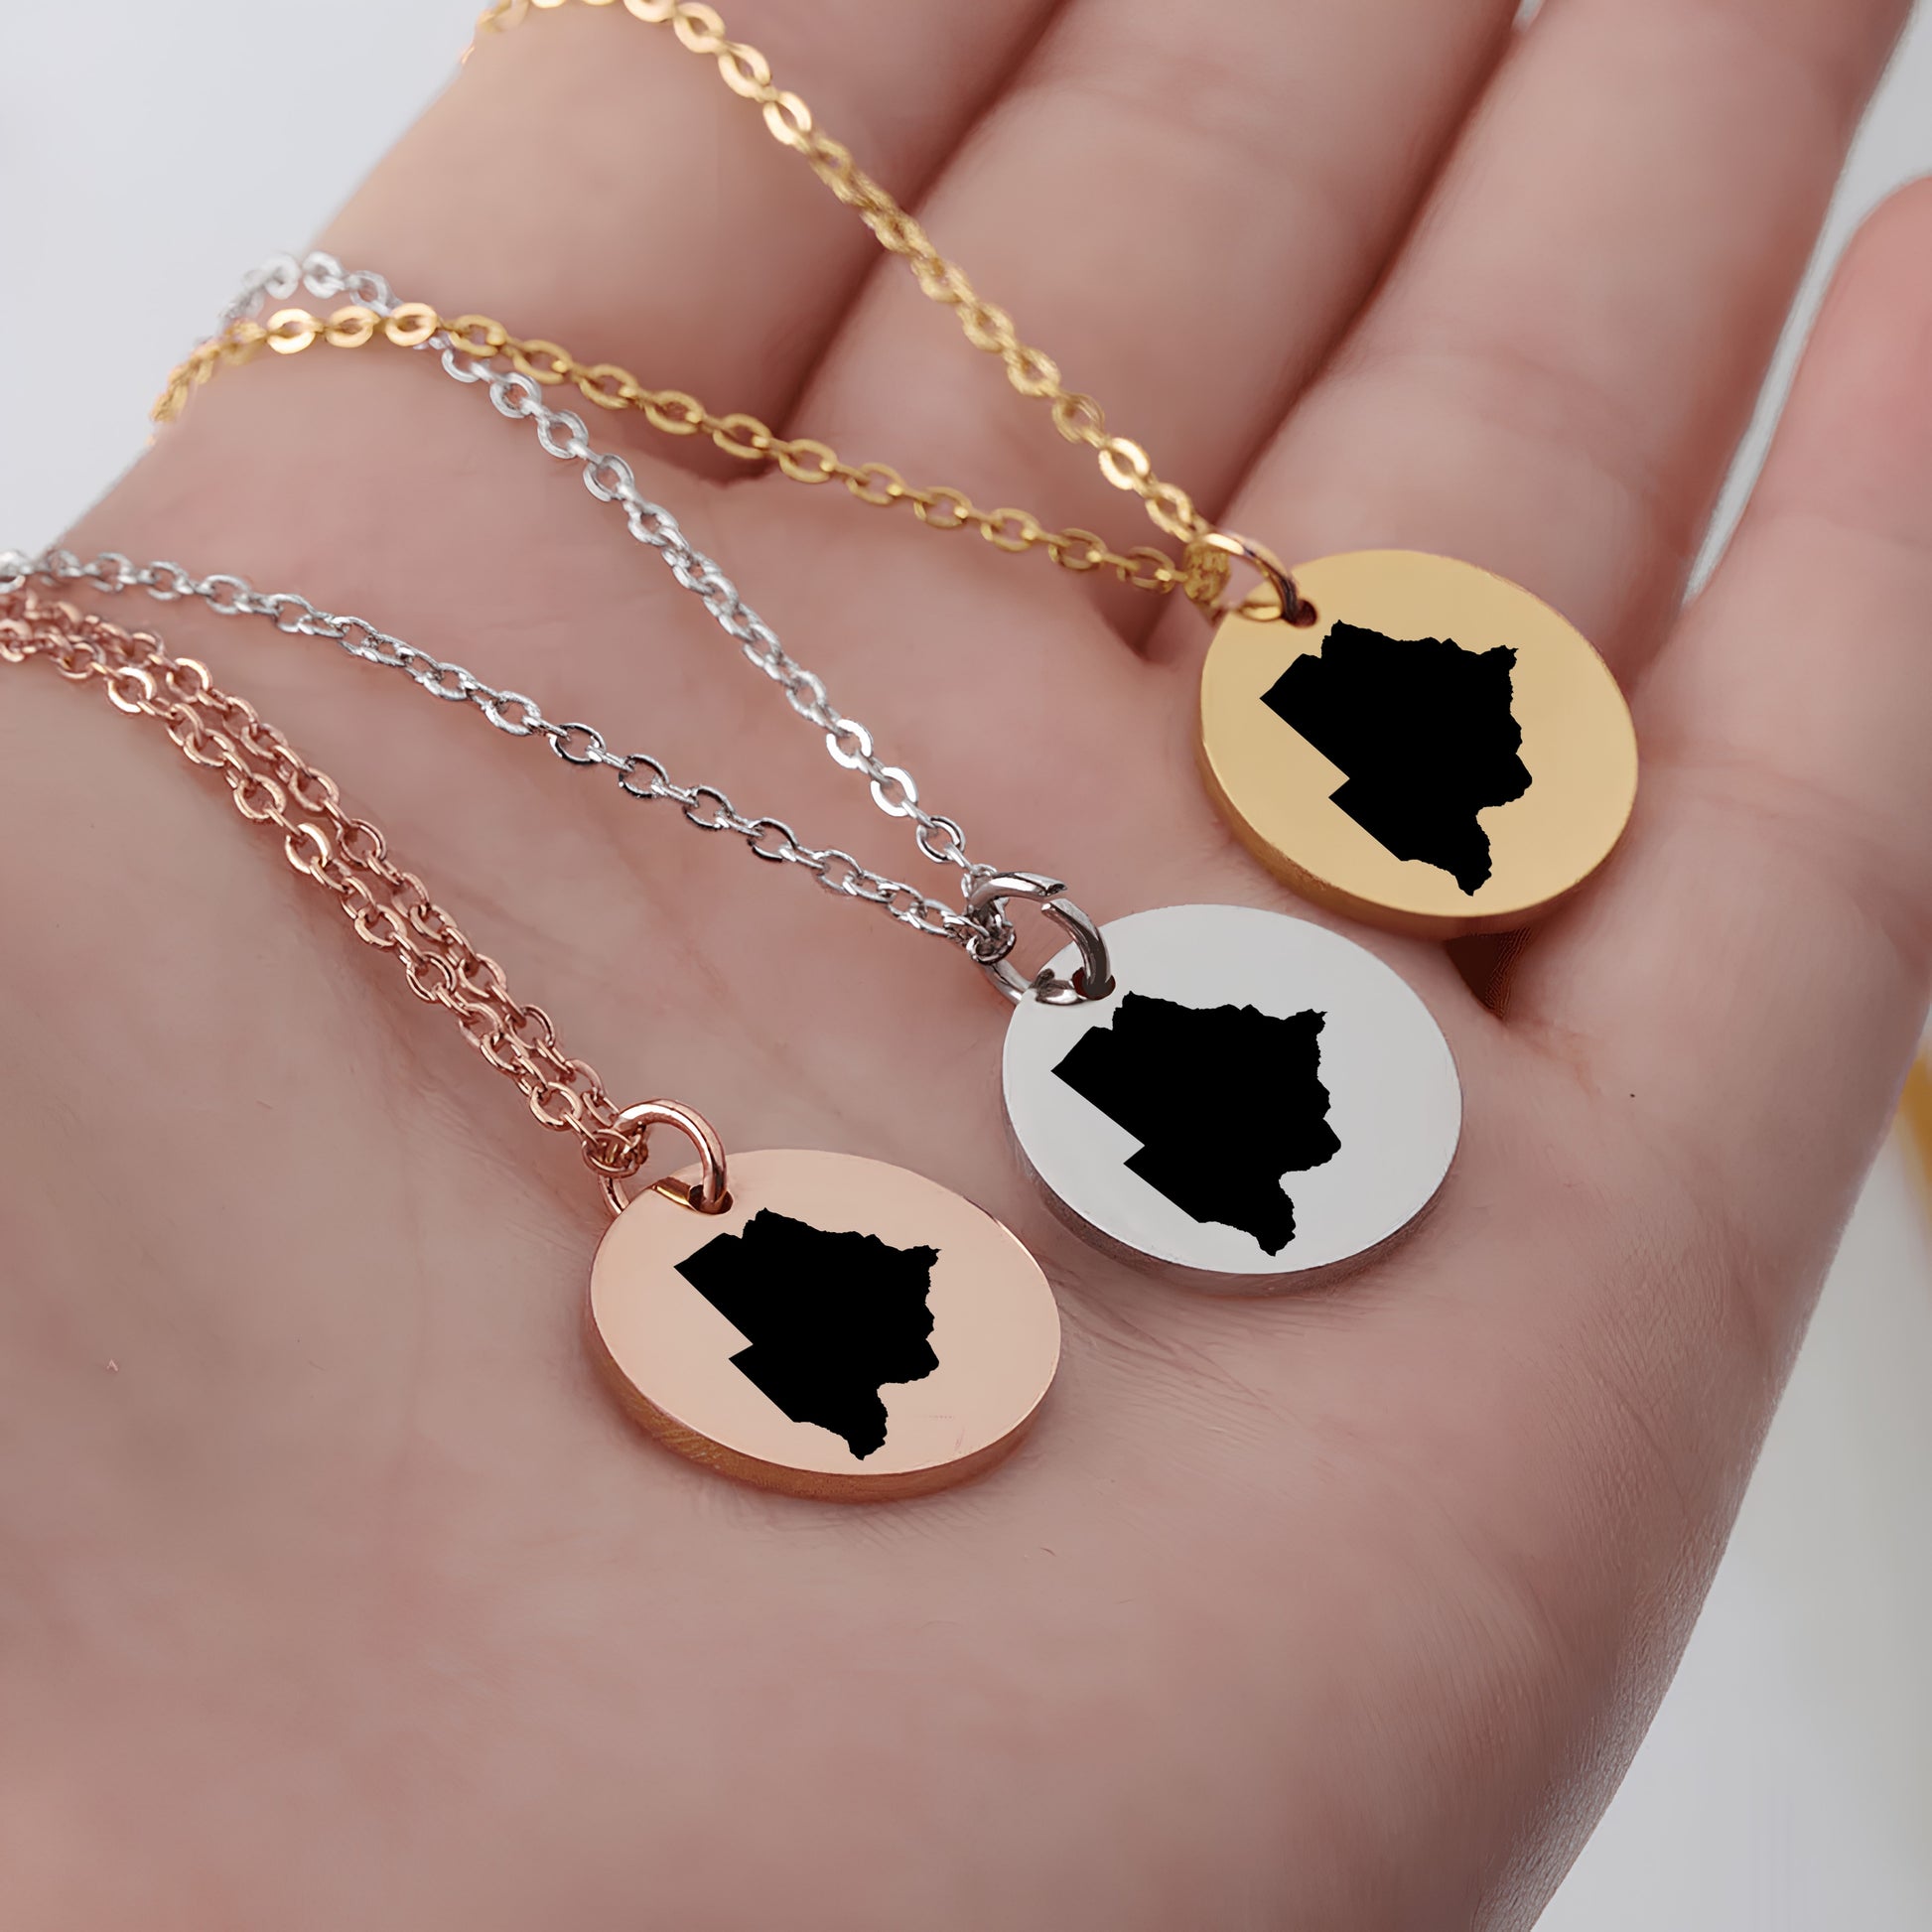 Botswana Country Map Necklace - Personalizable Jewelry